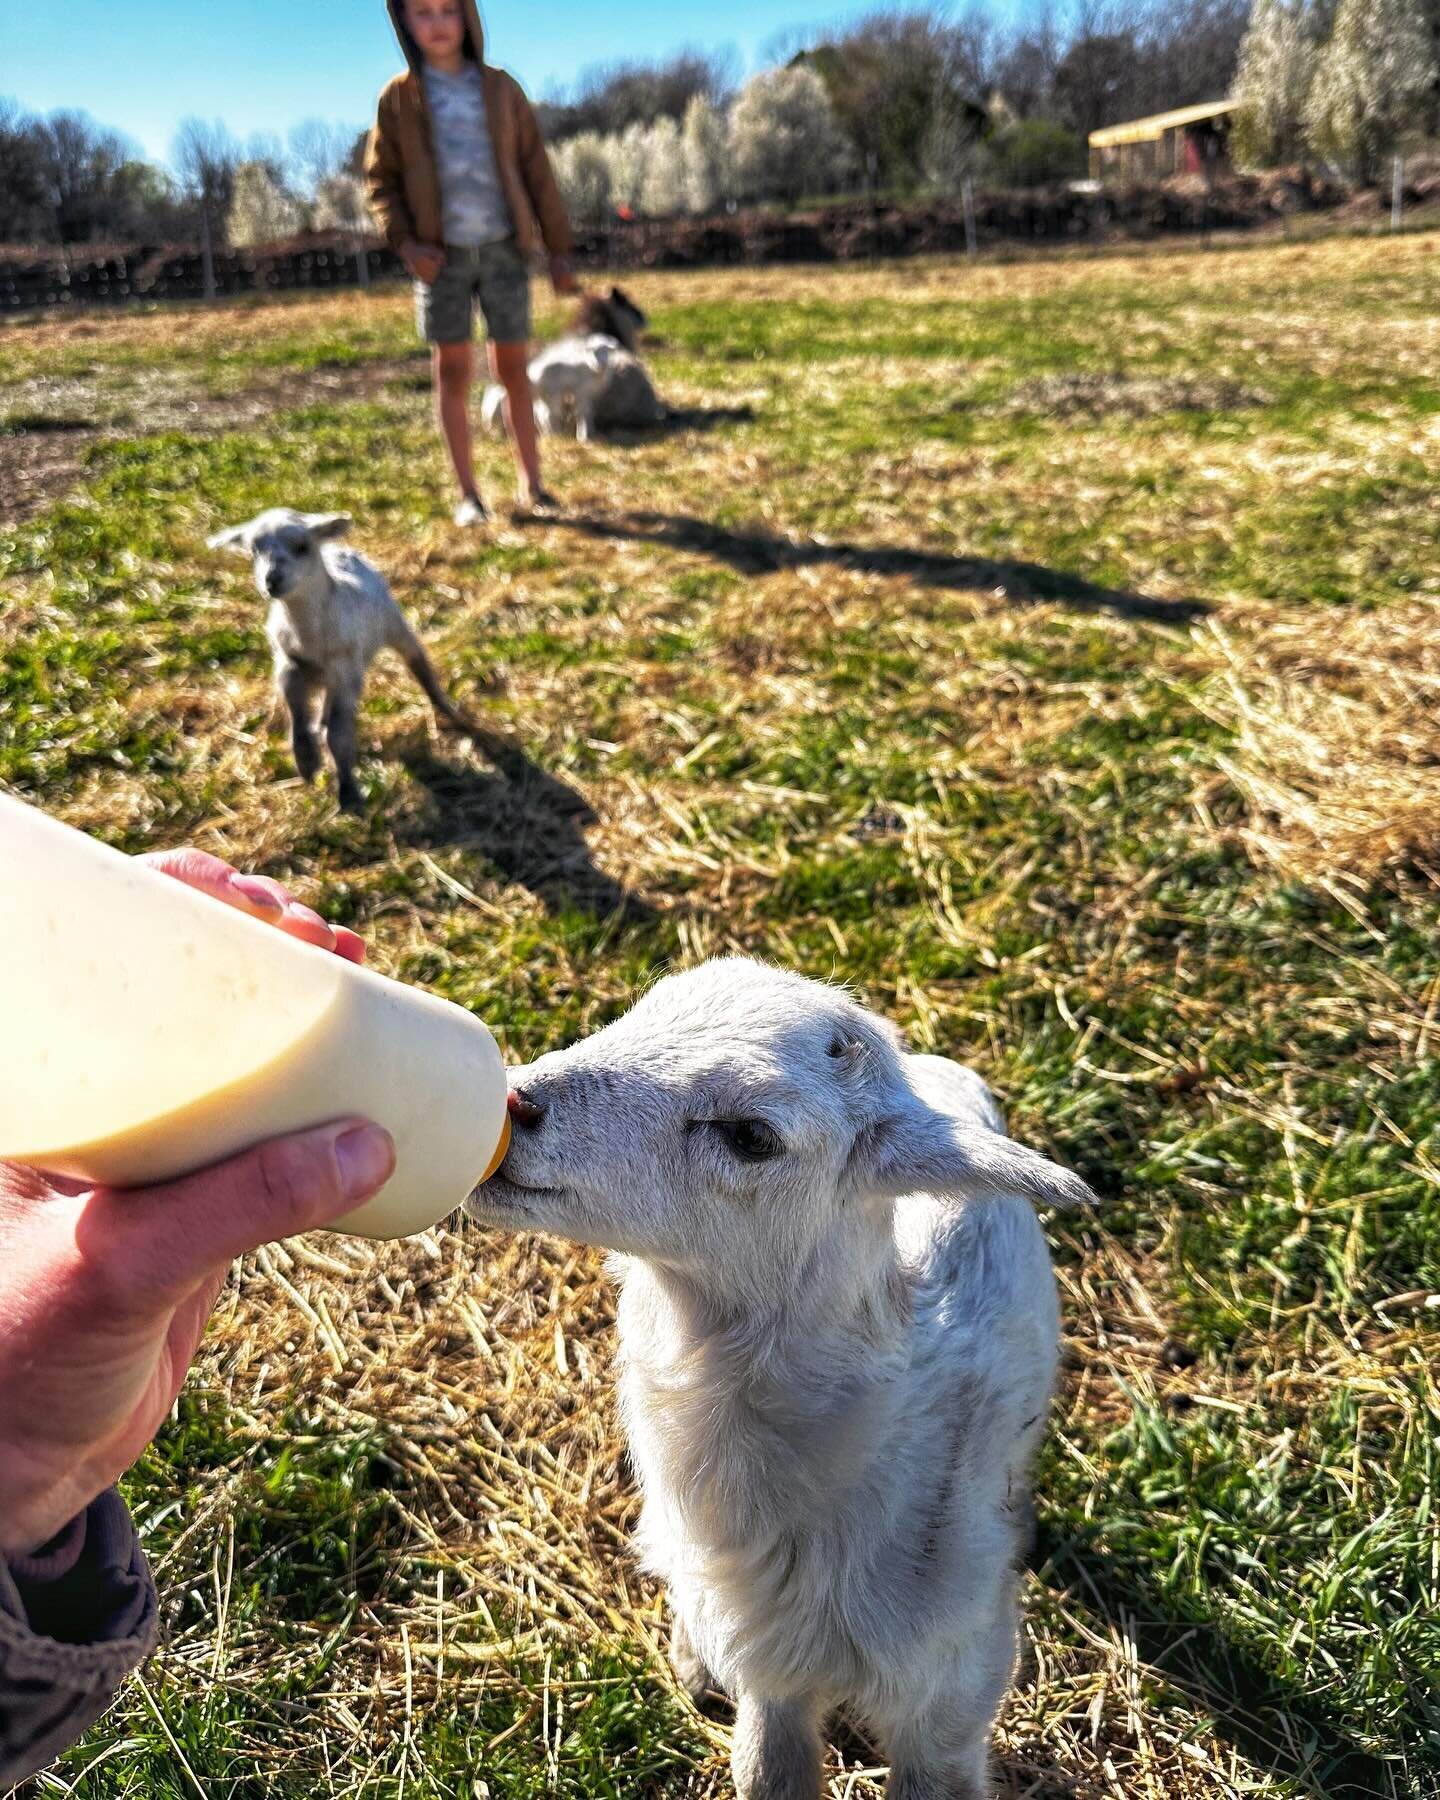 #ItsSpringTime Farm Tour

🌱 Lambing season is here, which means we&rsquo;re officially at Cuteness Level 💯

🌱 We&rsquo;re foraging edible flowers for a fun forthcoming project

🌱 Planting a fresh asparagus patch

🌱 Chillaxin&rsquo; in the sunshi